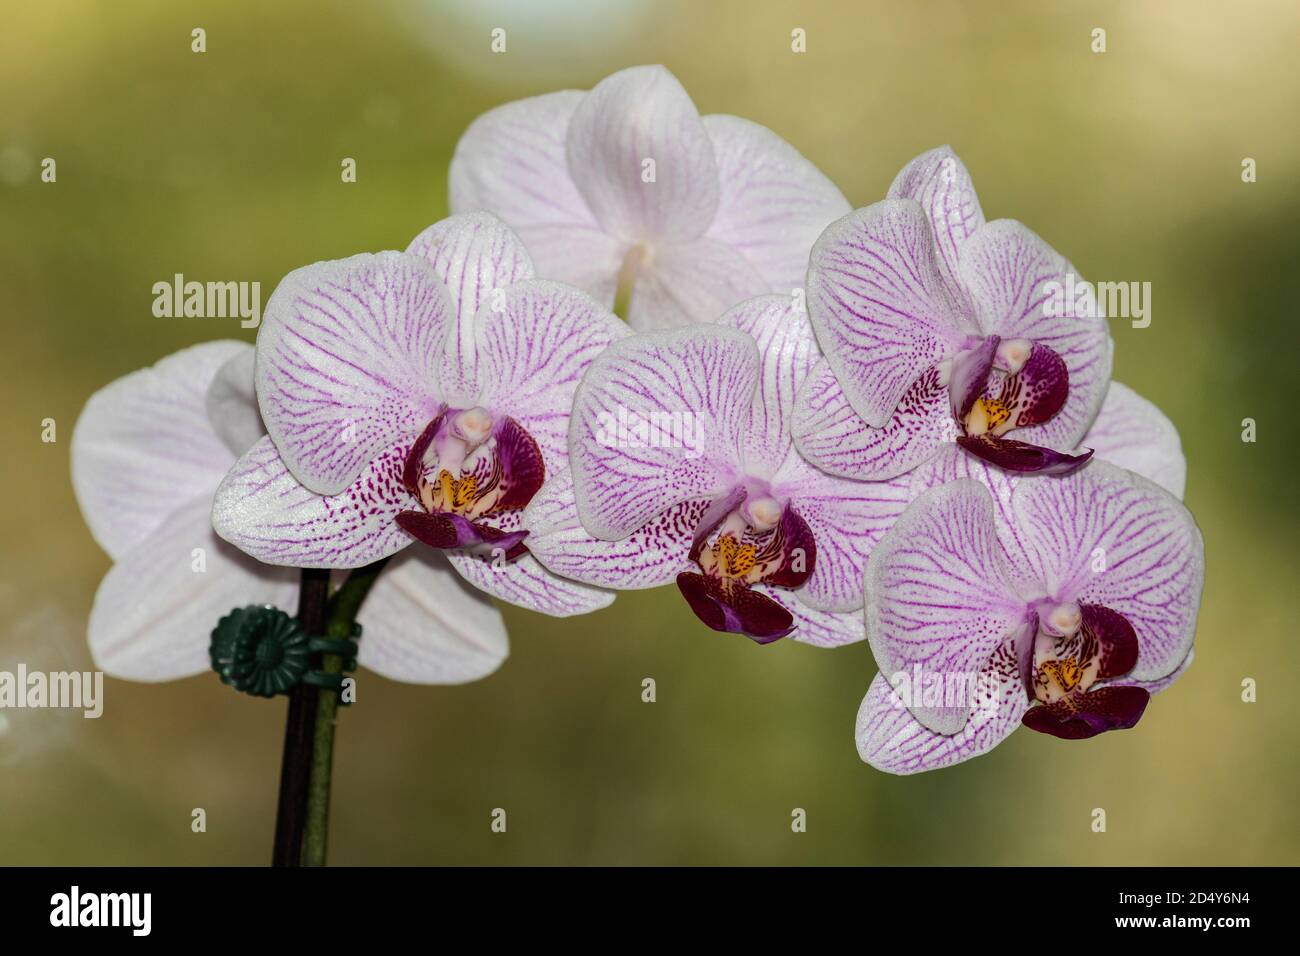 Cattleya Orchid plant in flower Stock Photo